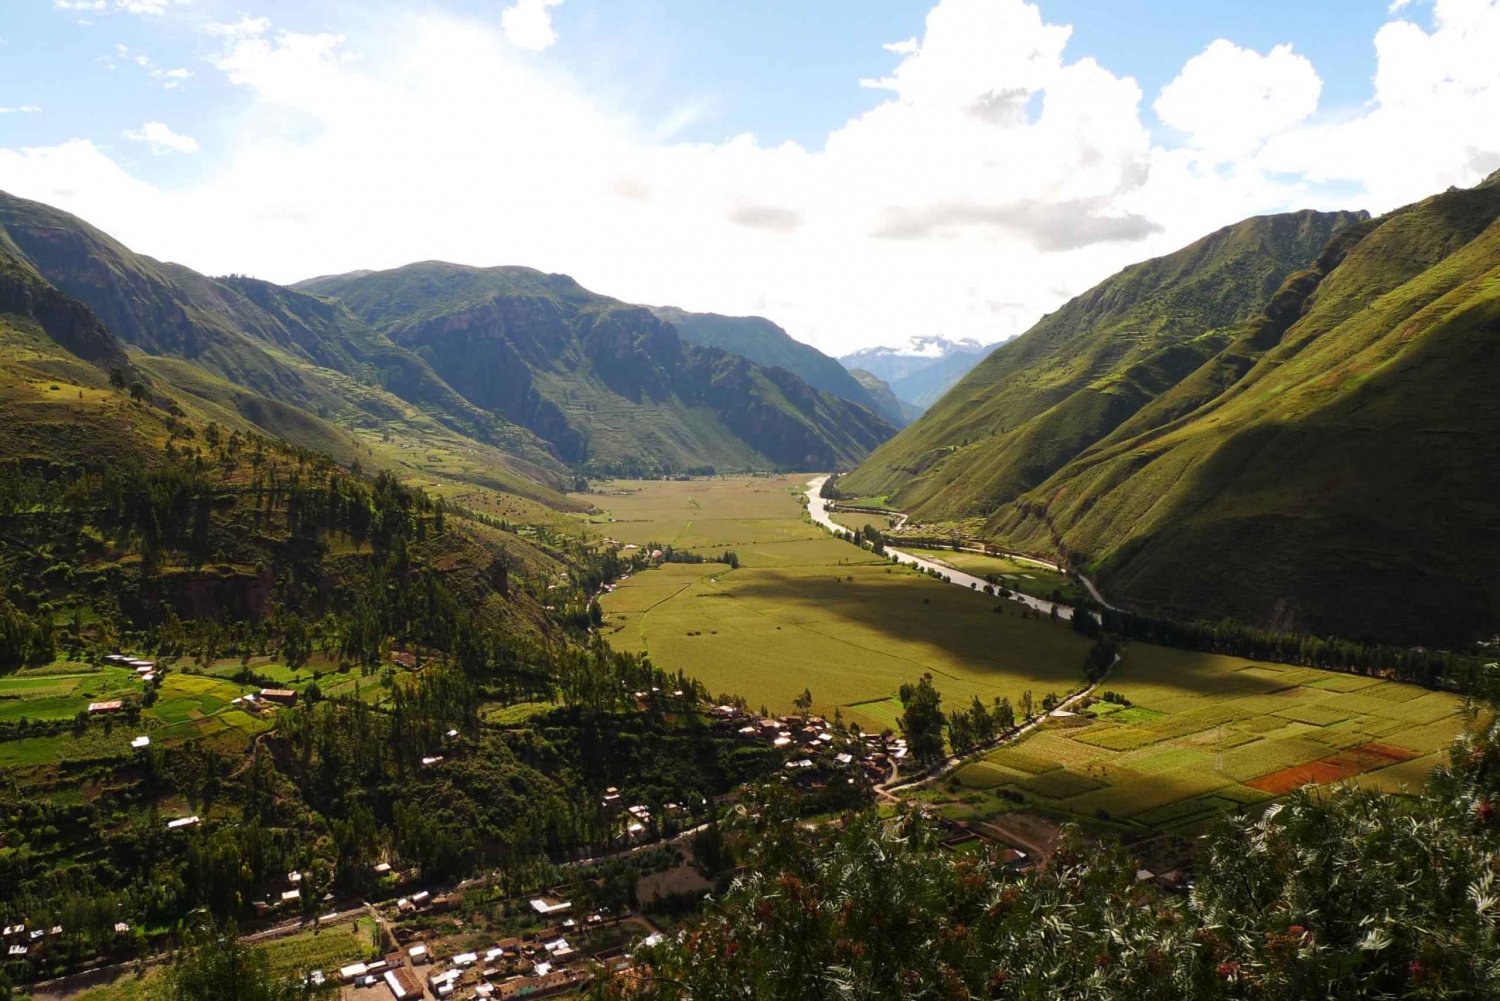 Private Full-Day Sacred Valley Tour